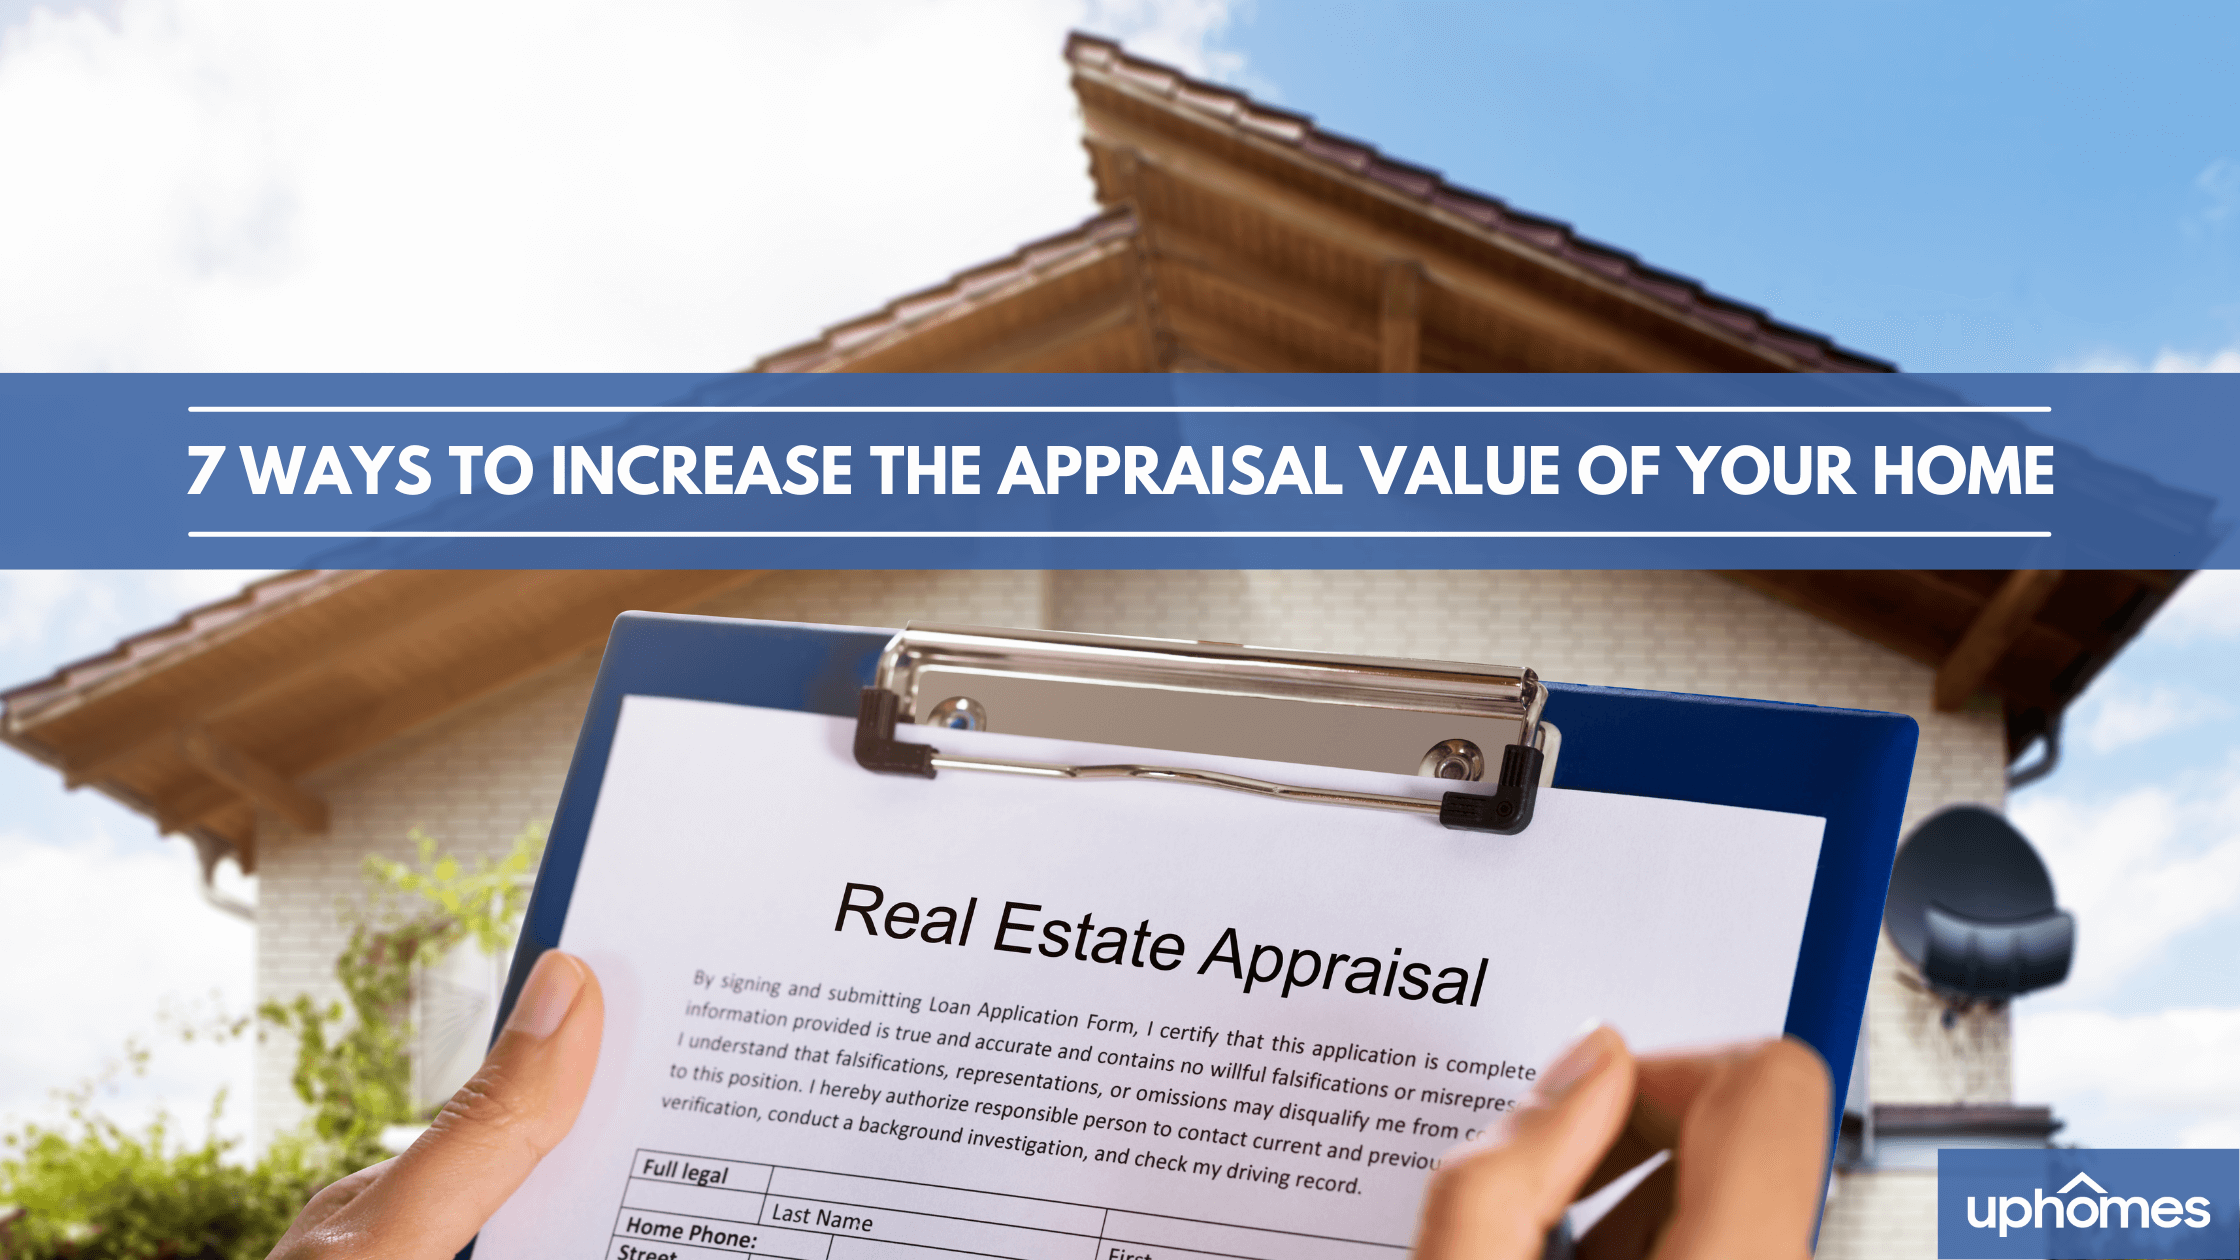 7 Ways To Increase the Appraisal Value of Your Home - Strengthen the Appraisal Value!